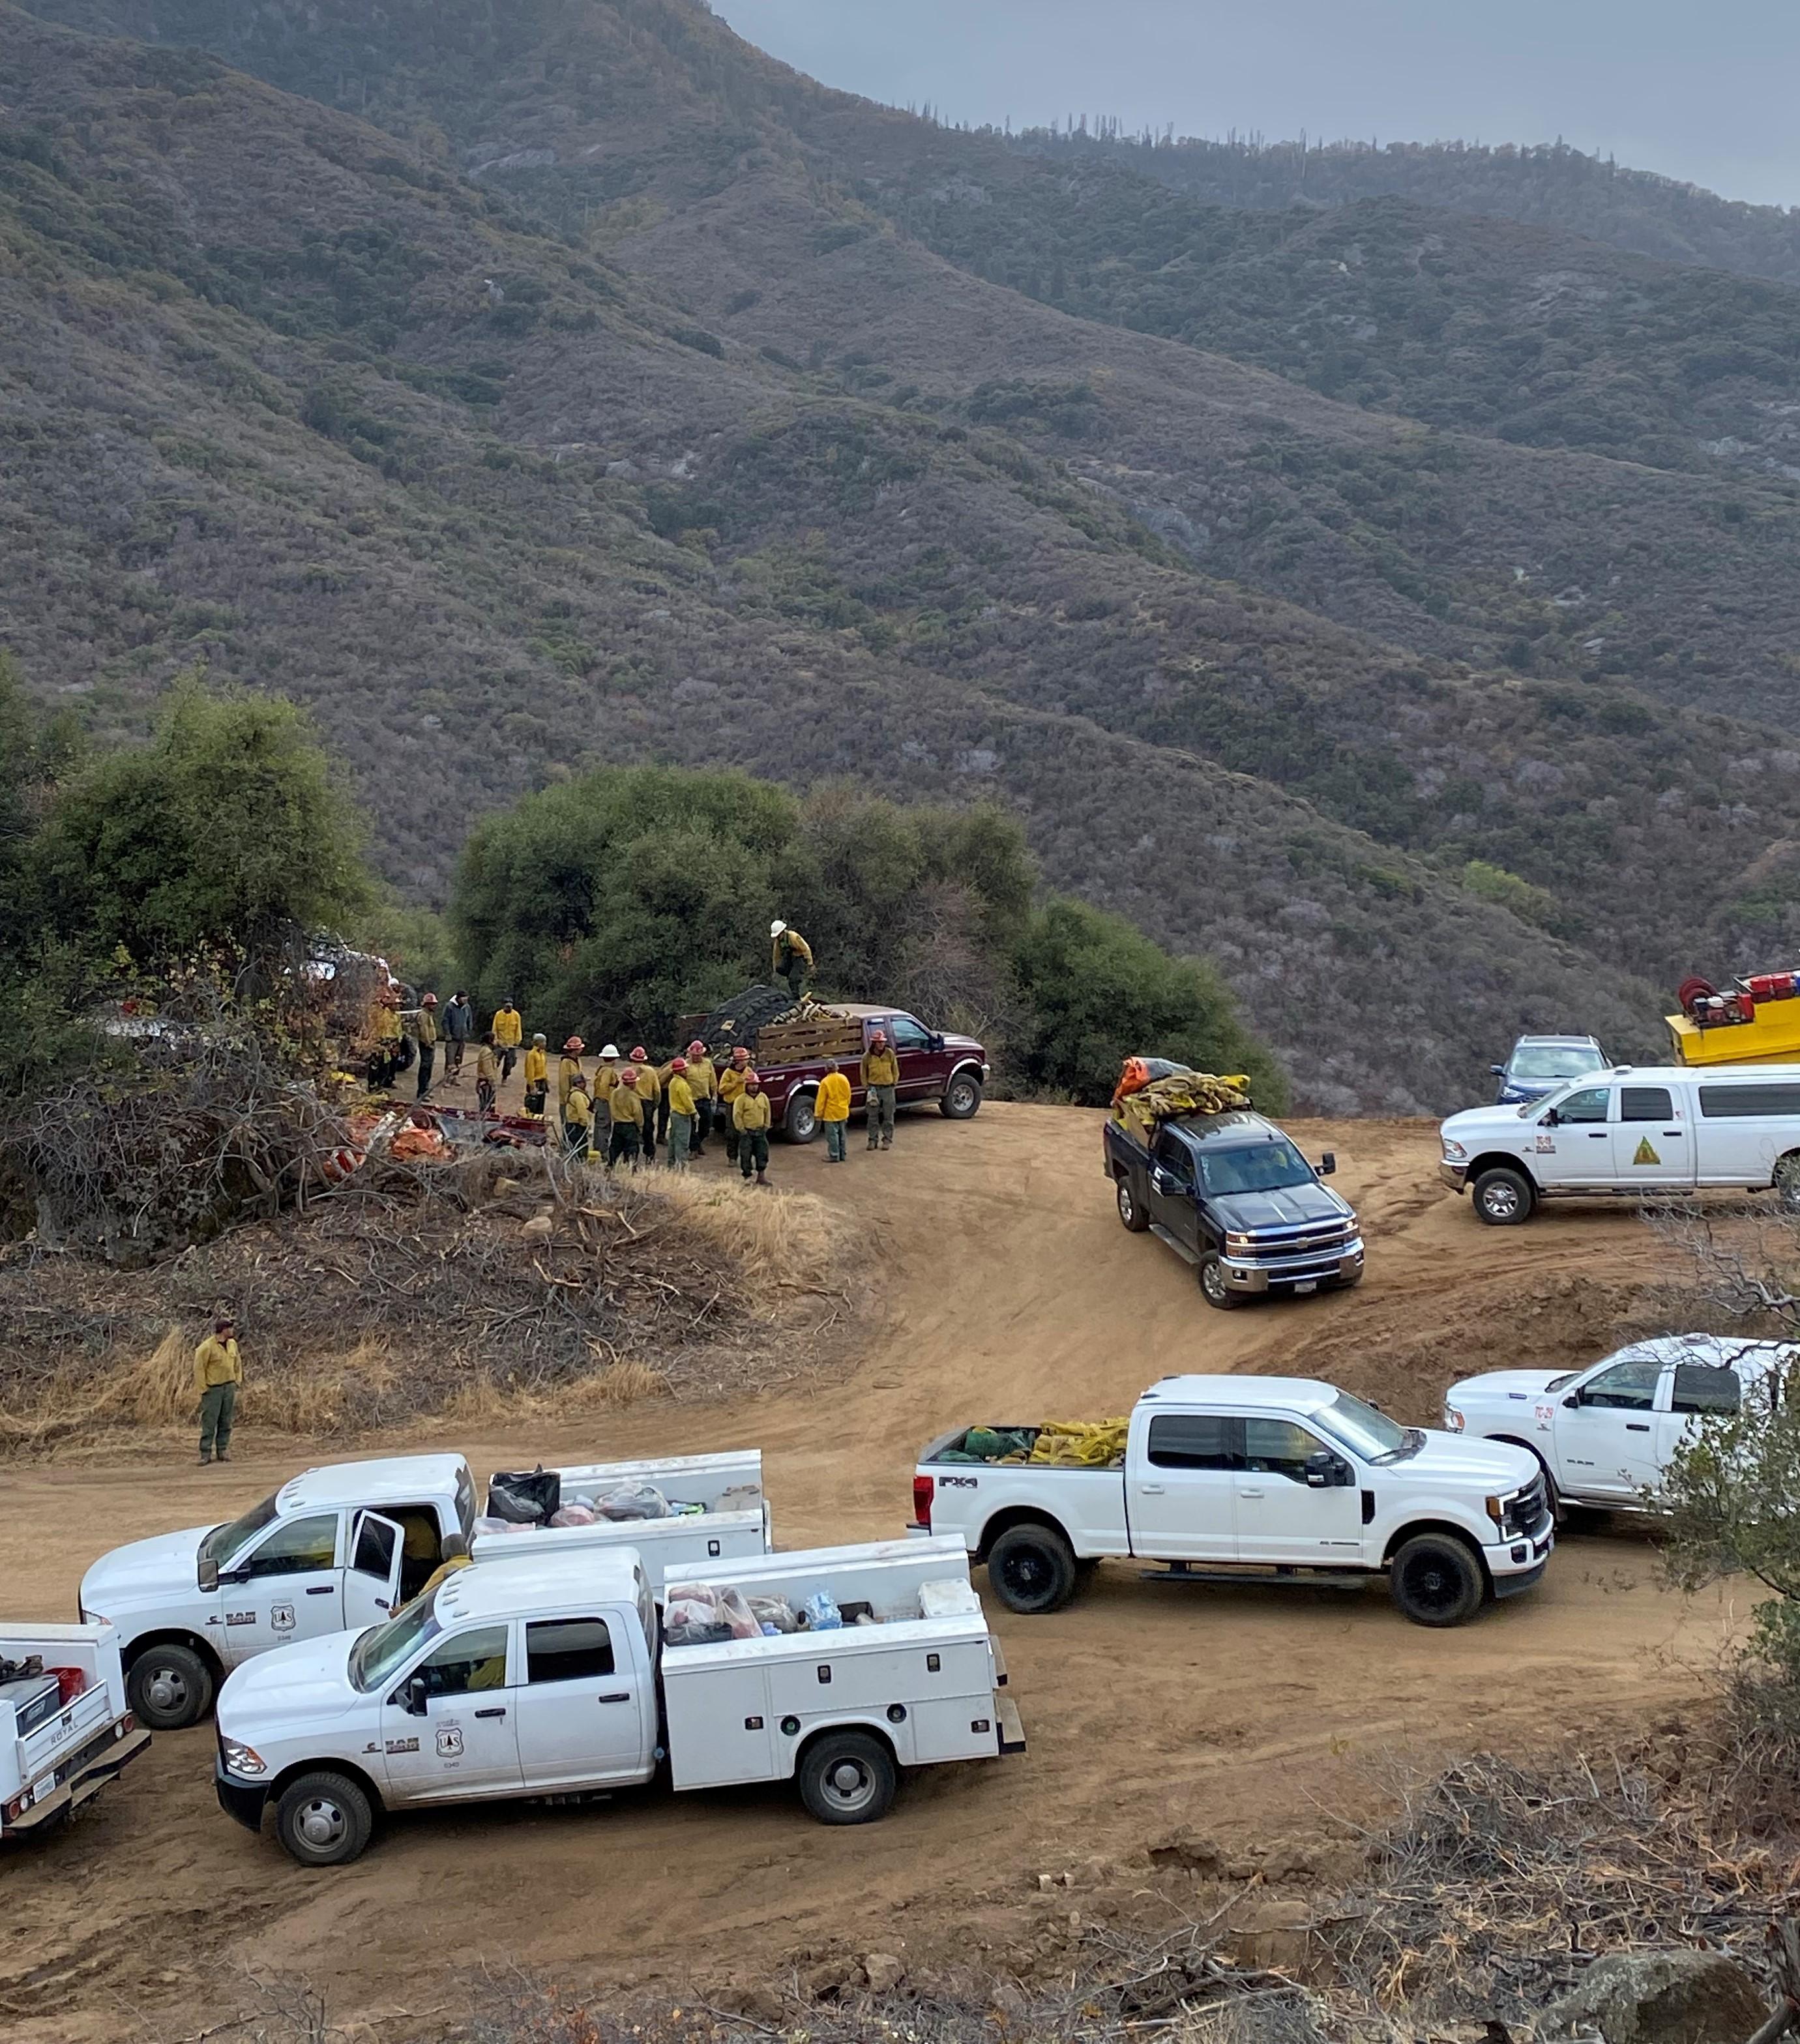 Crews and trucks move around a staging area with a mountain in the background